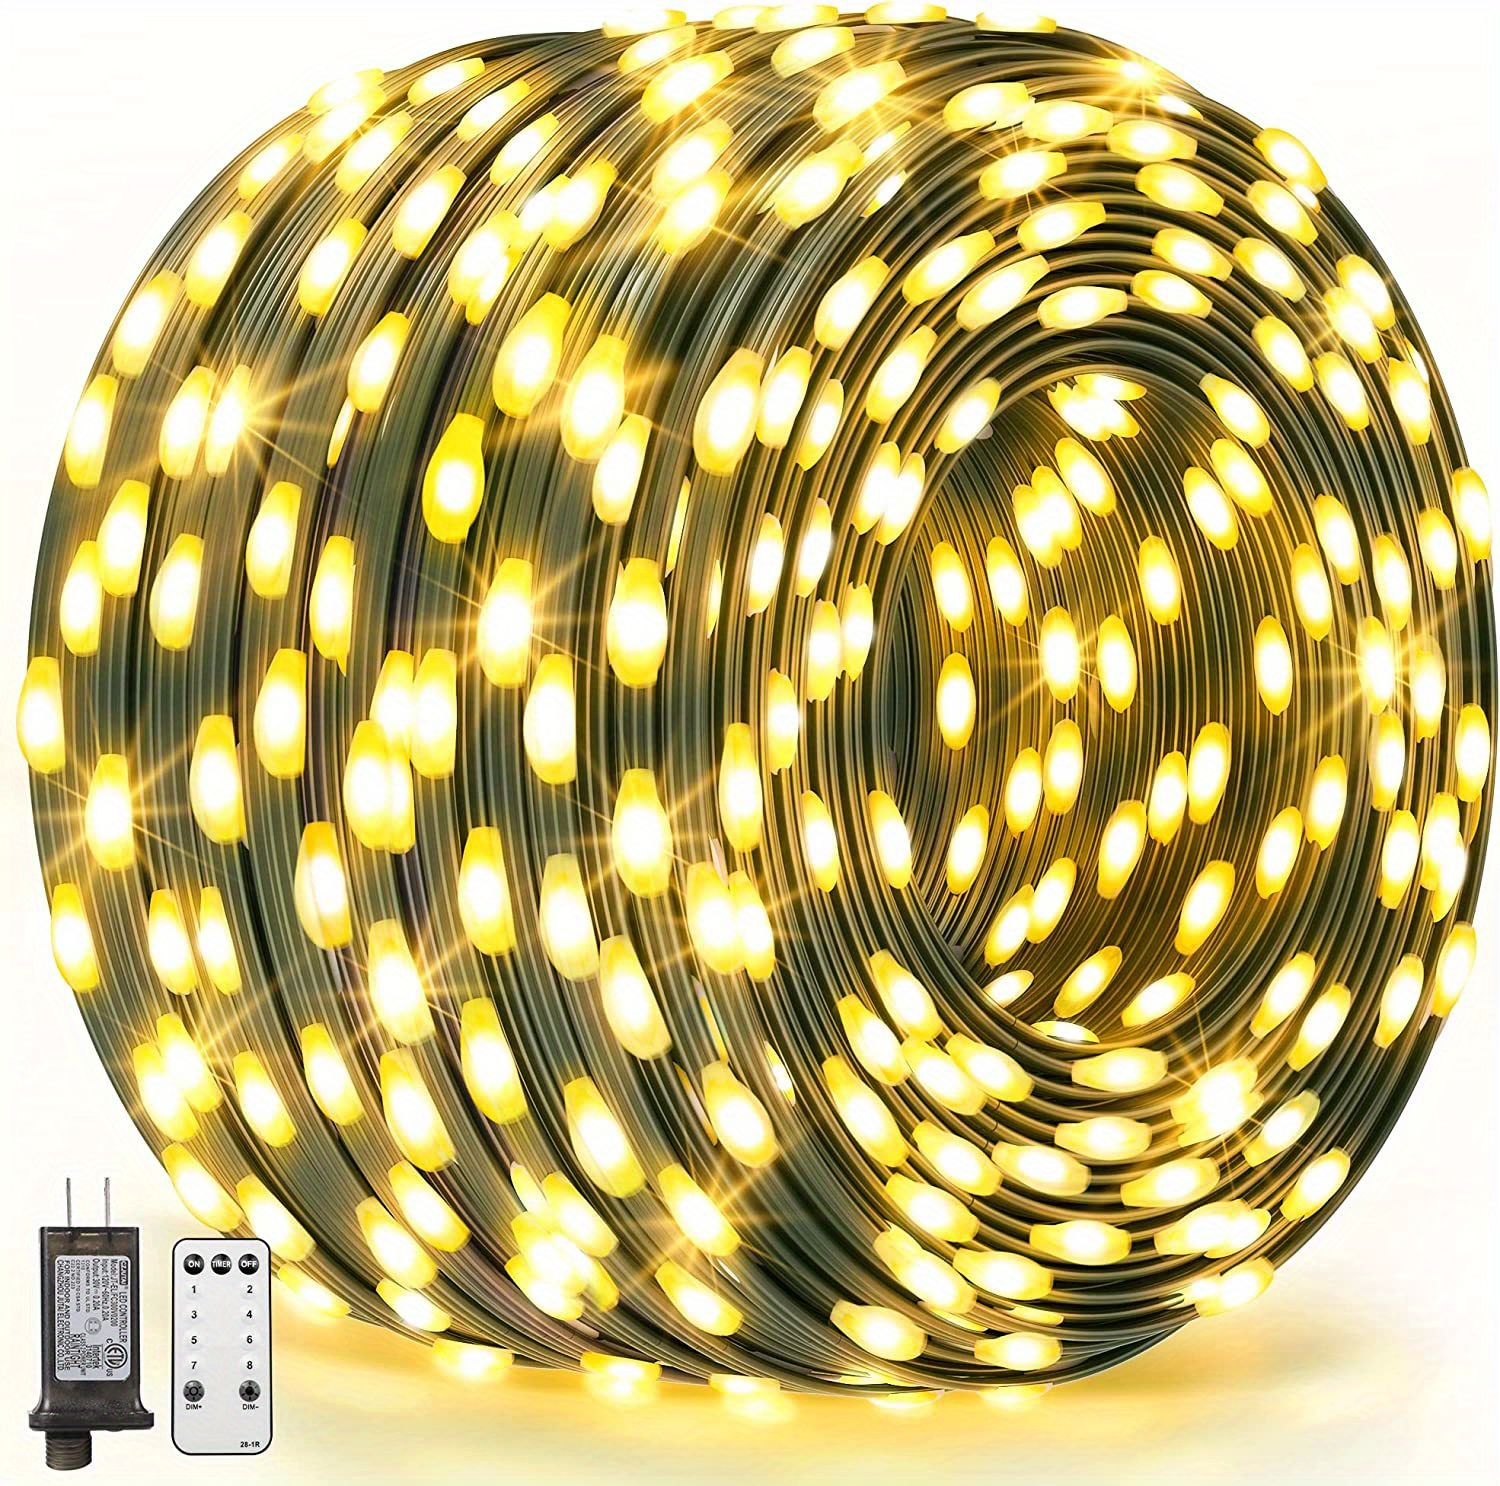 1 set 1000 led christmas lights 405ft outdoor string lights plug in fairy lights green wire with remote timer 8 lighting modes decorations lights for tree xmas indoor wedding garden multi colored warm white cool white details 0